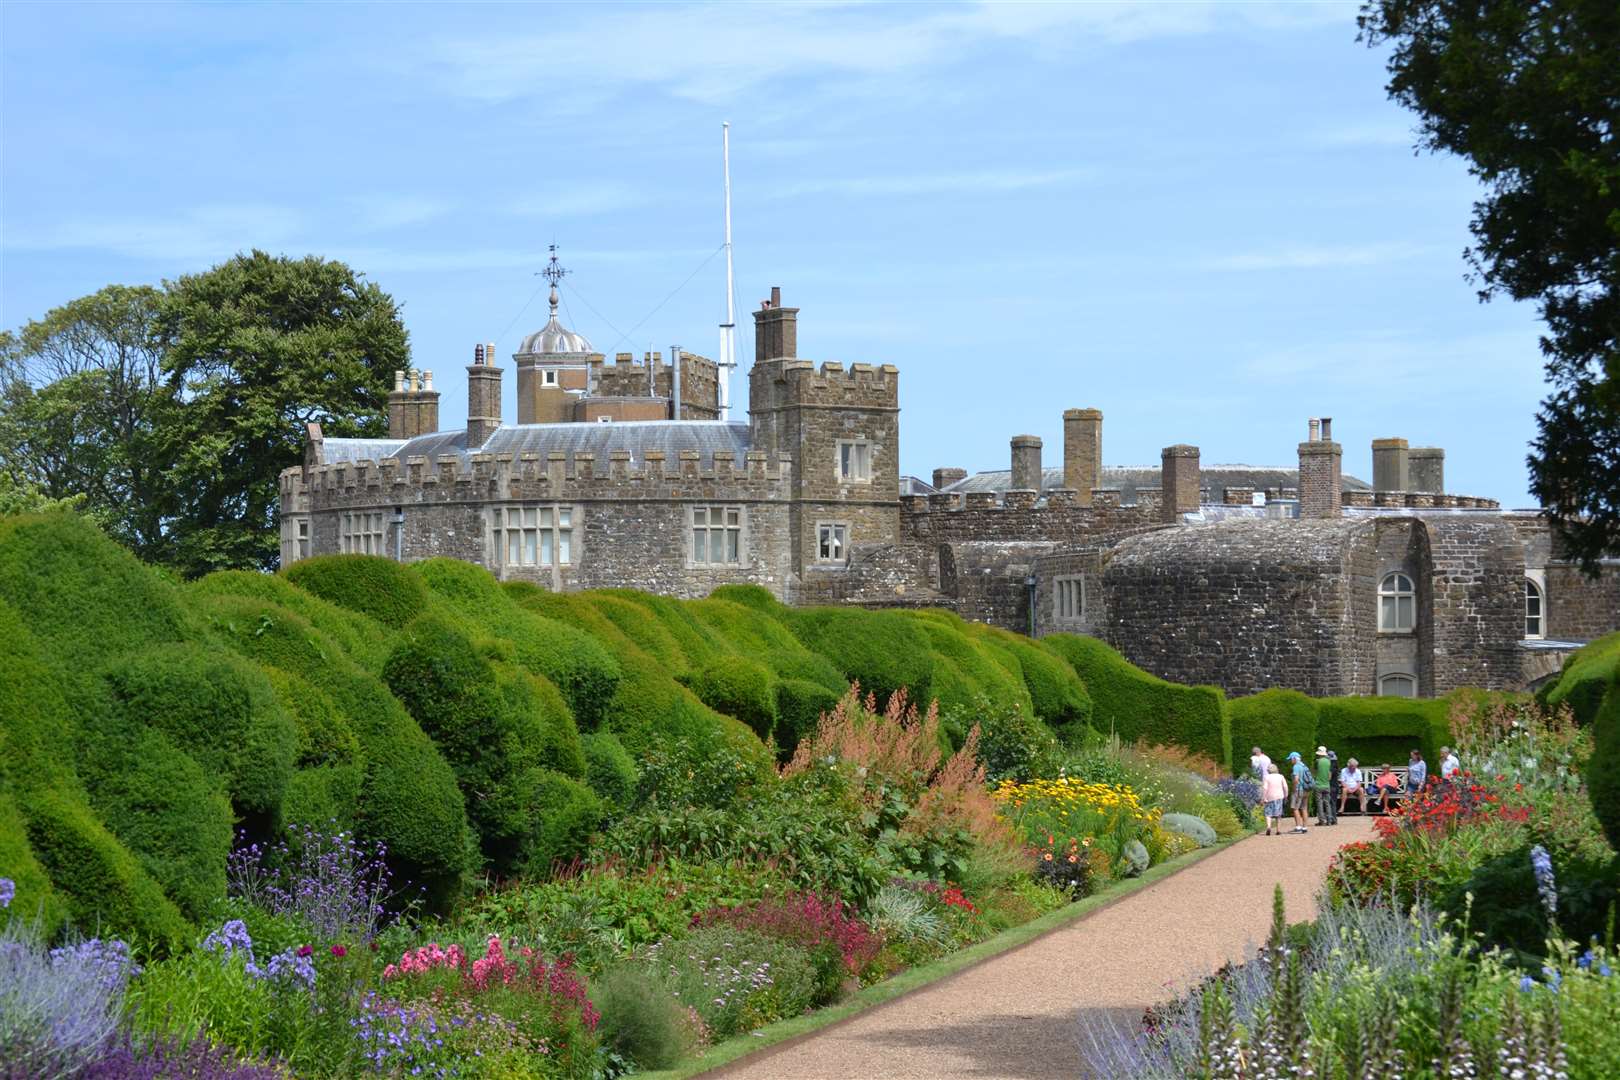 Explore the beautiful gardens at Walmer Castle for free with a lottery ticket. Picture: Elaine Bryan